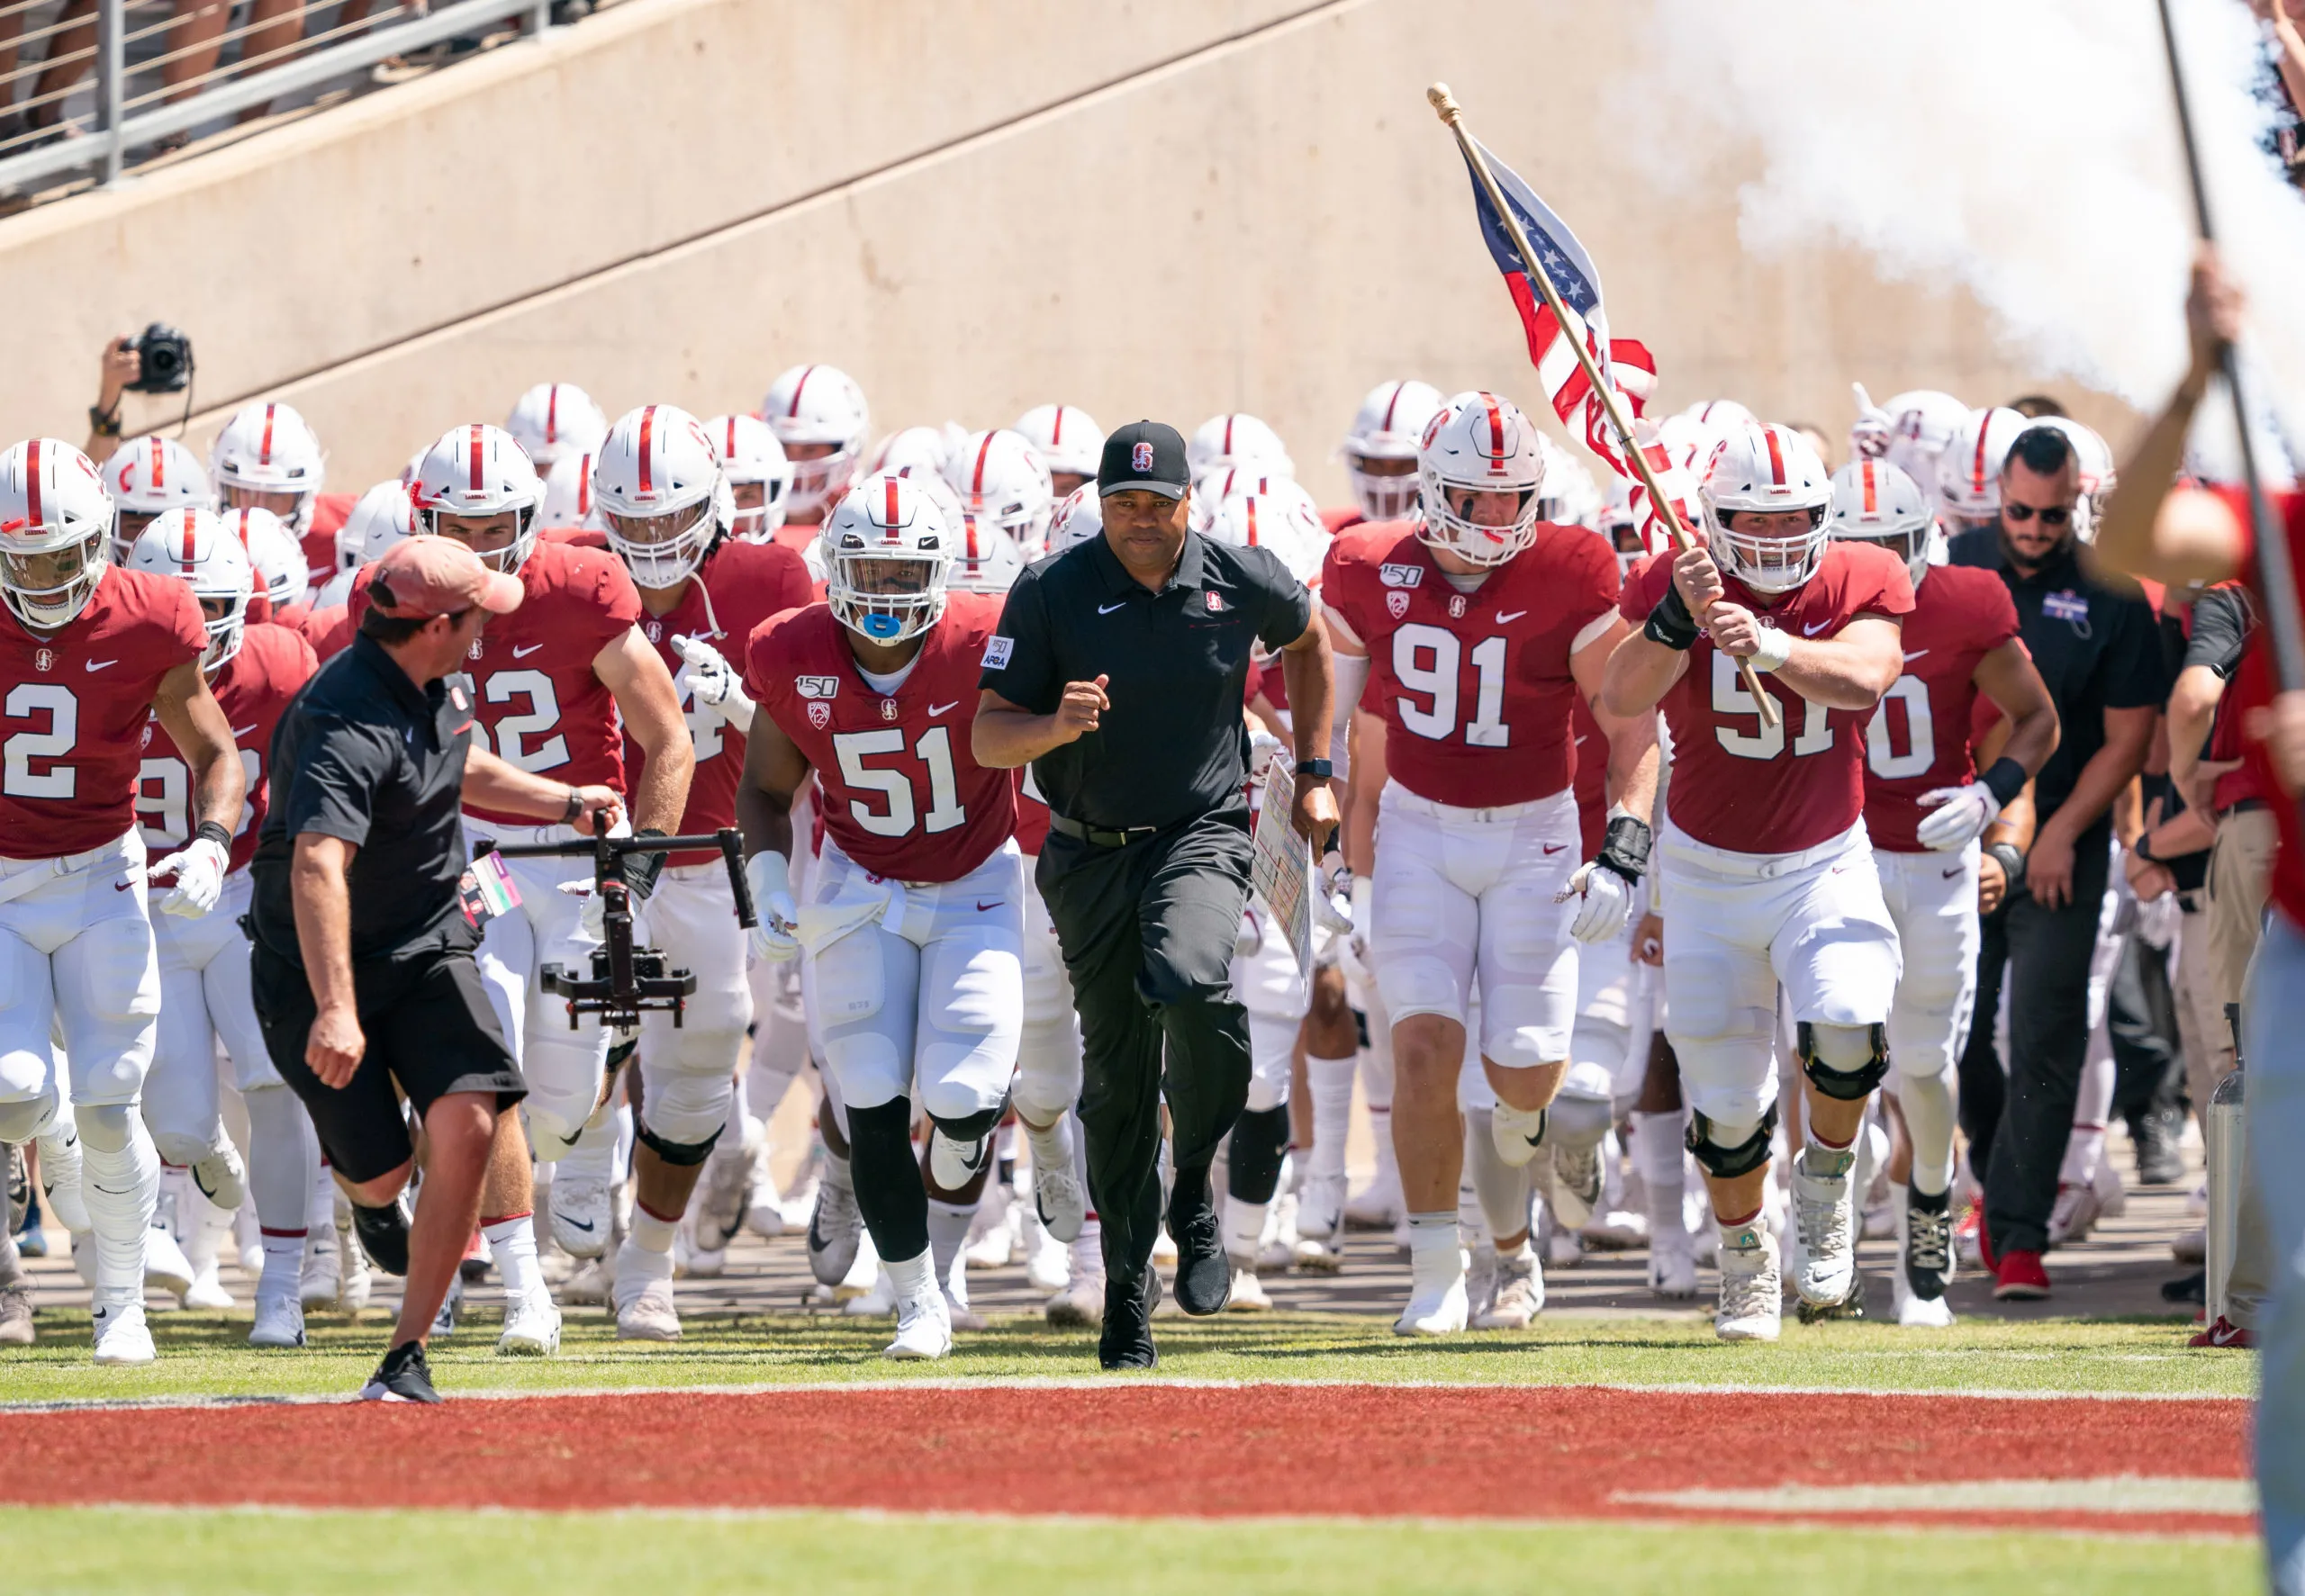 The Stanford football team runs out onto the field at the start of a game.